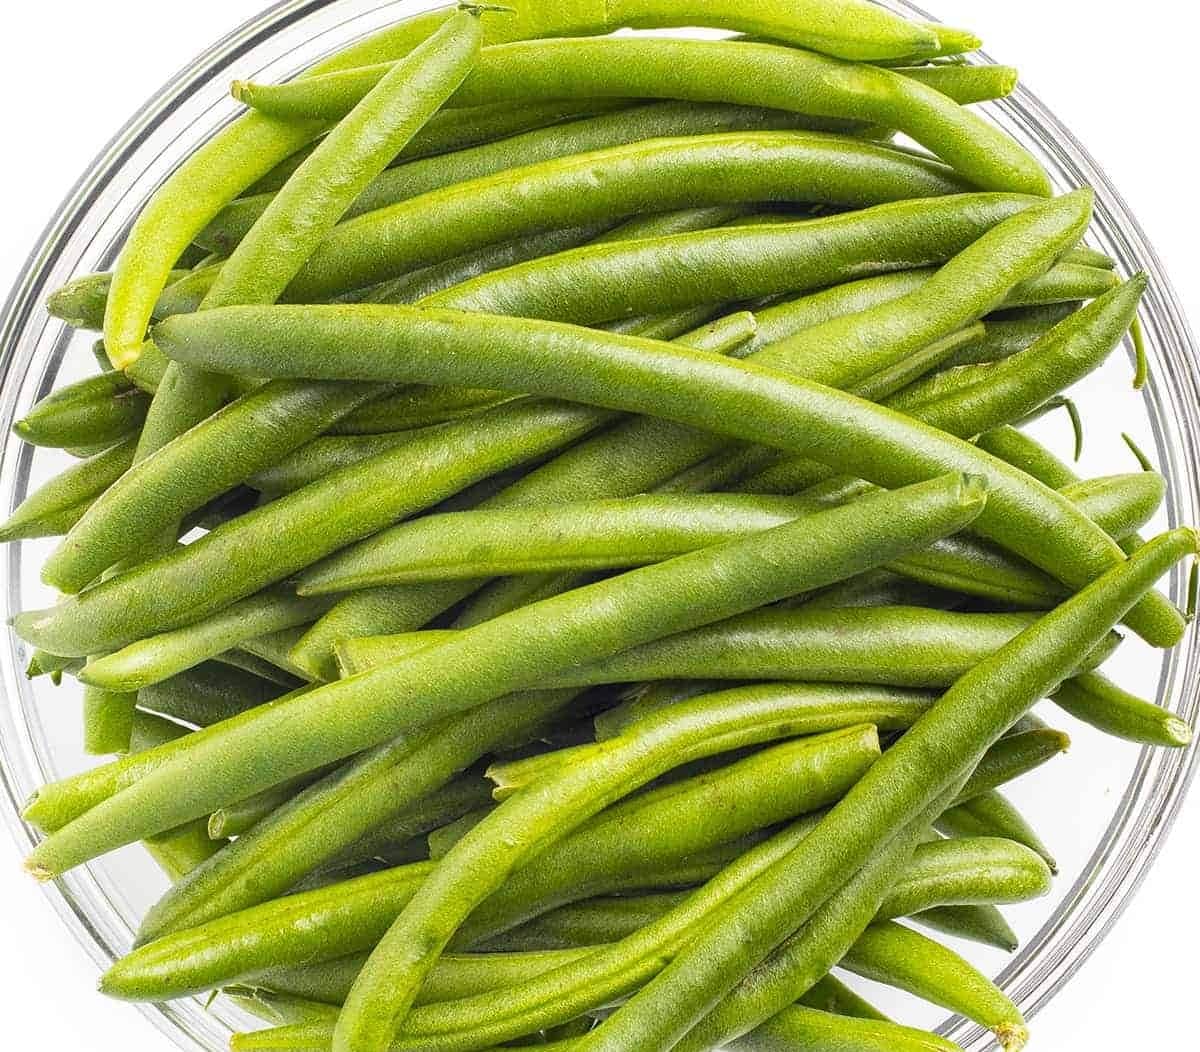 Green beans in a bowl.